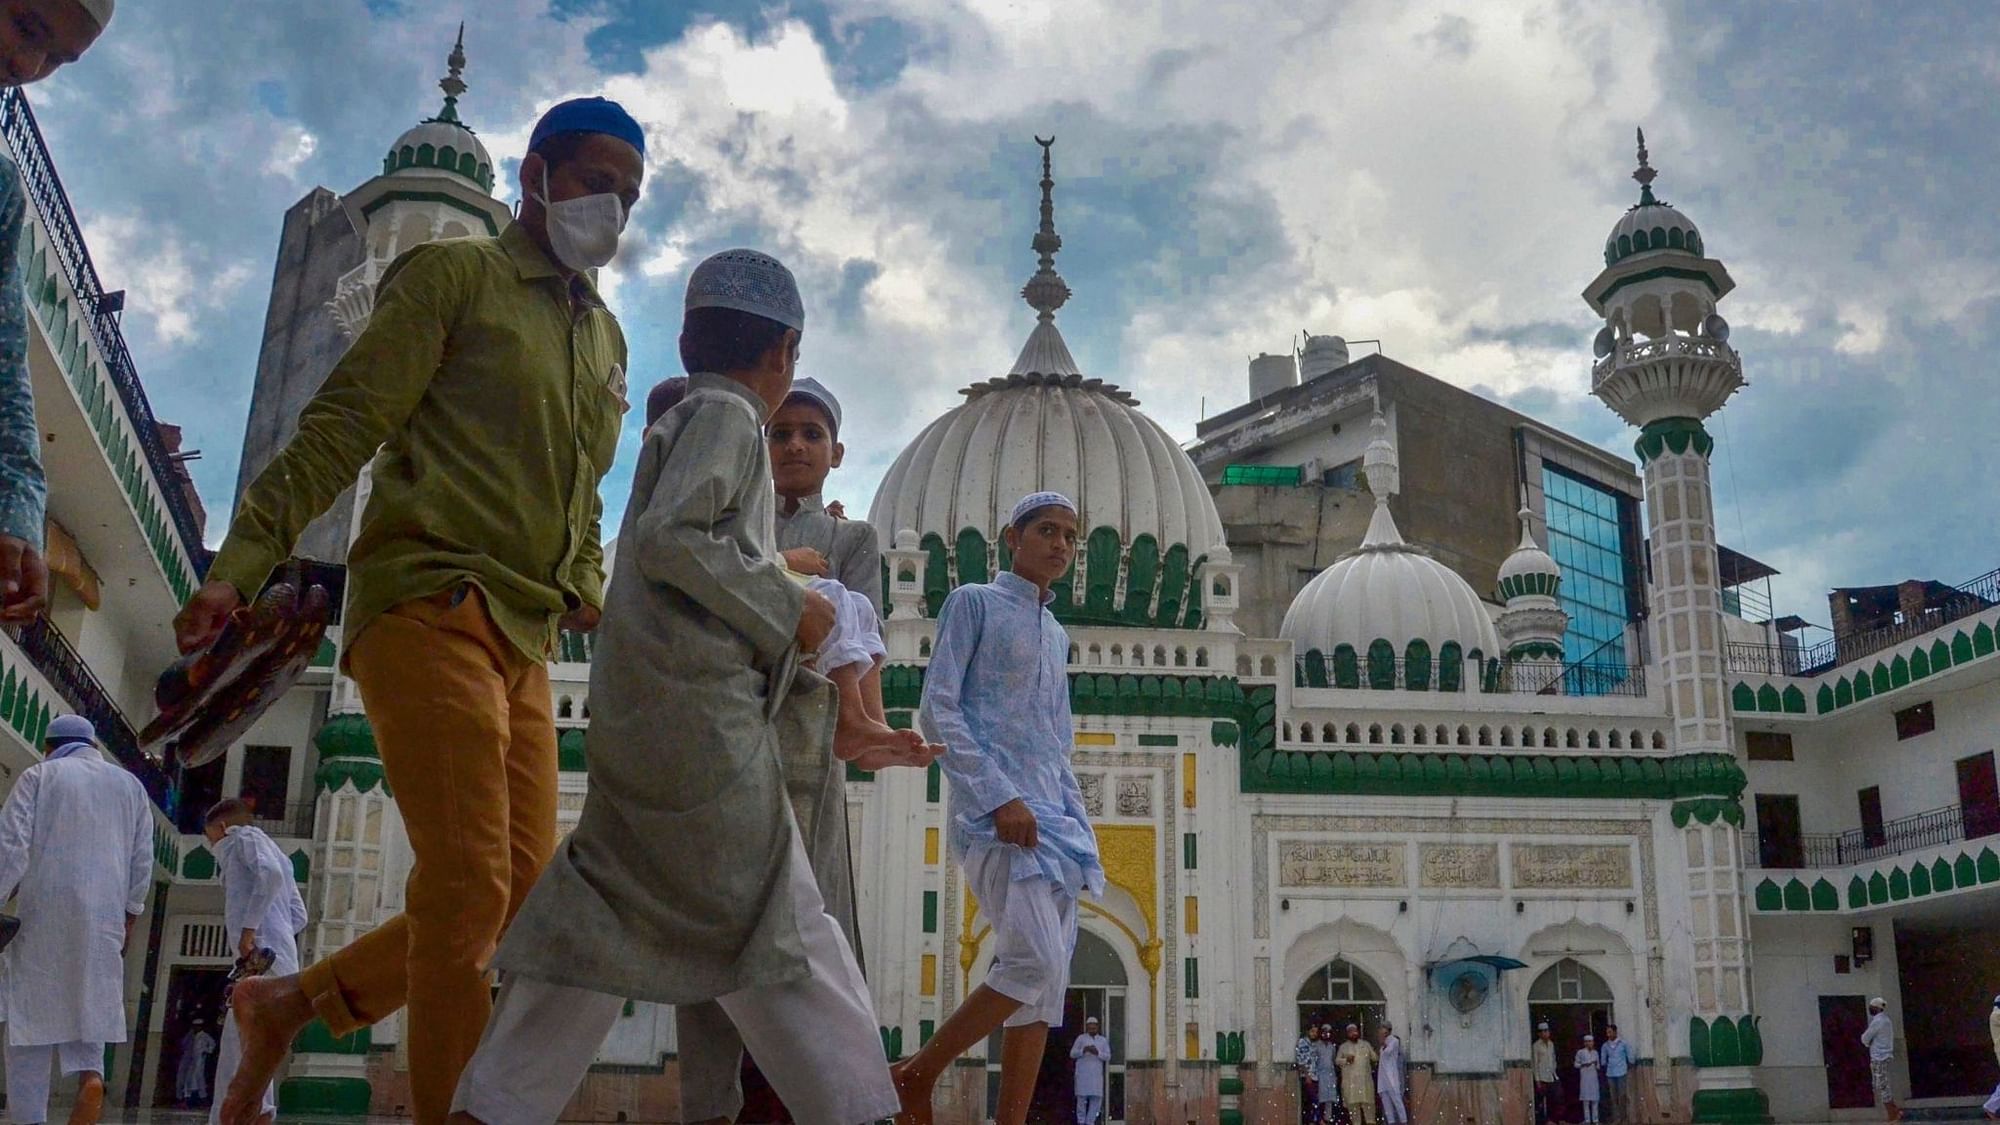 Following the demolition, the UP Sunni Central Waqf Board, on Tuesday, condemned the “high-handed” act. Image used for representational purposes.